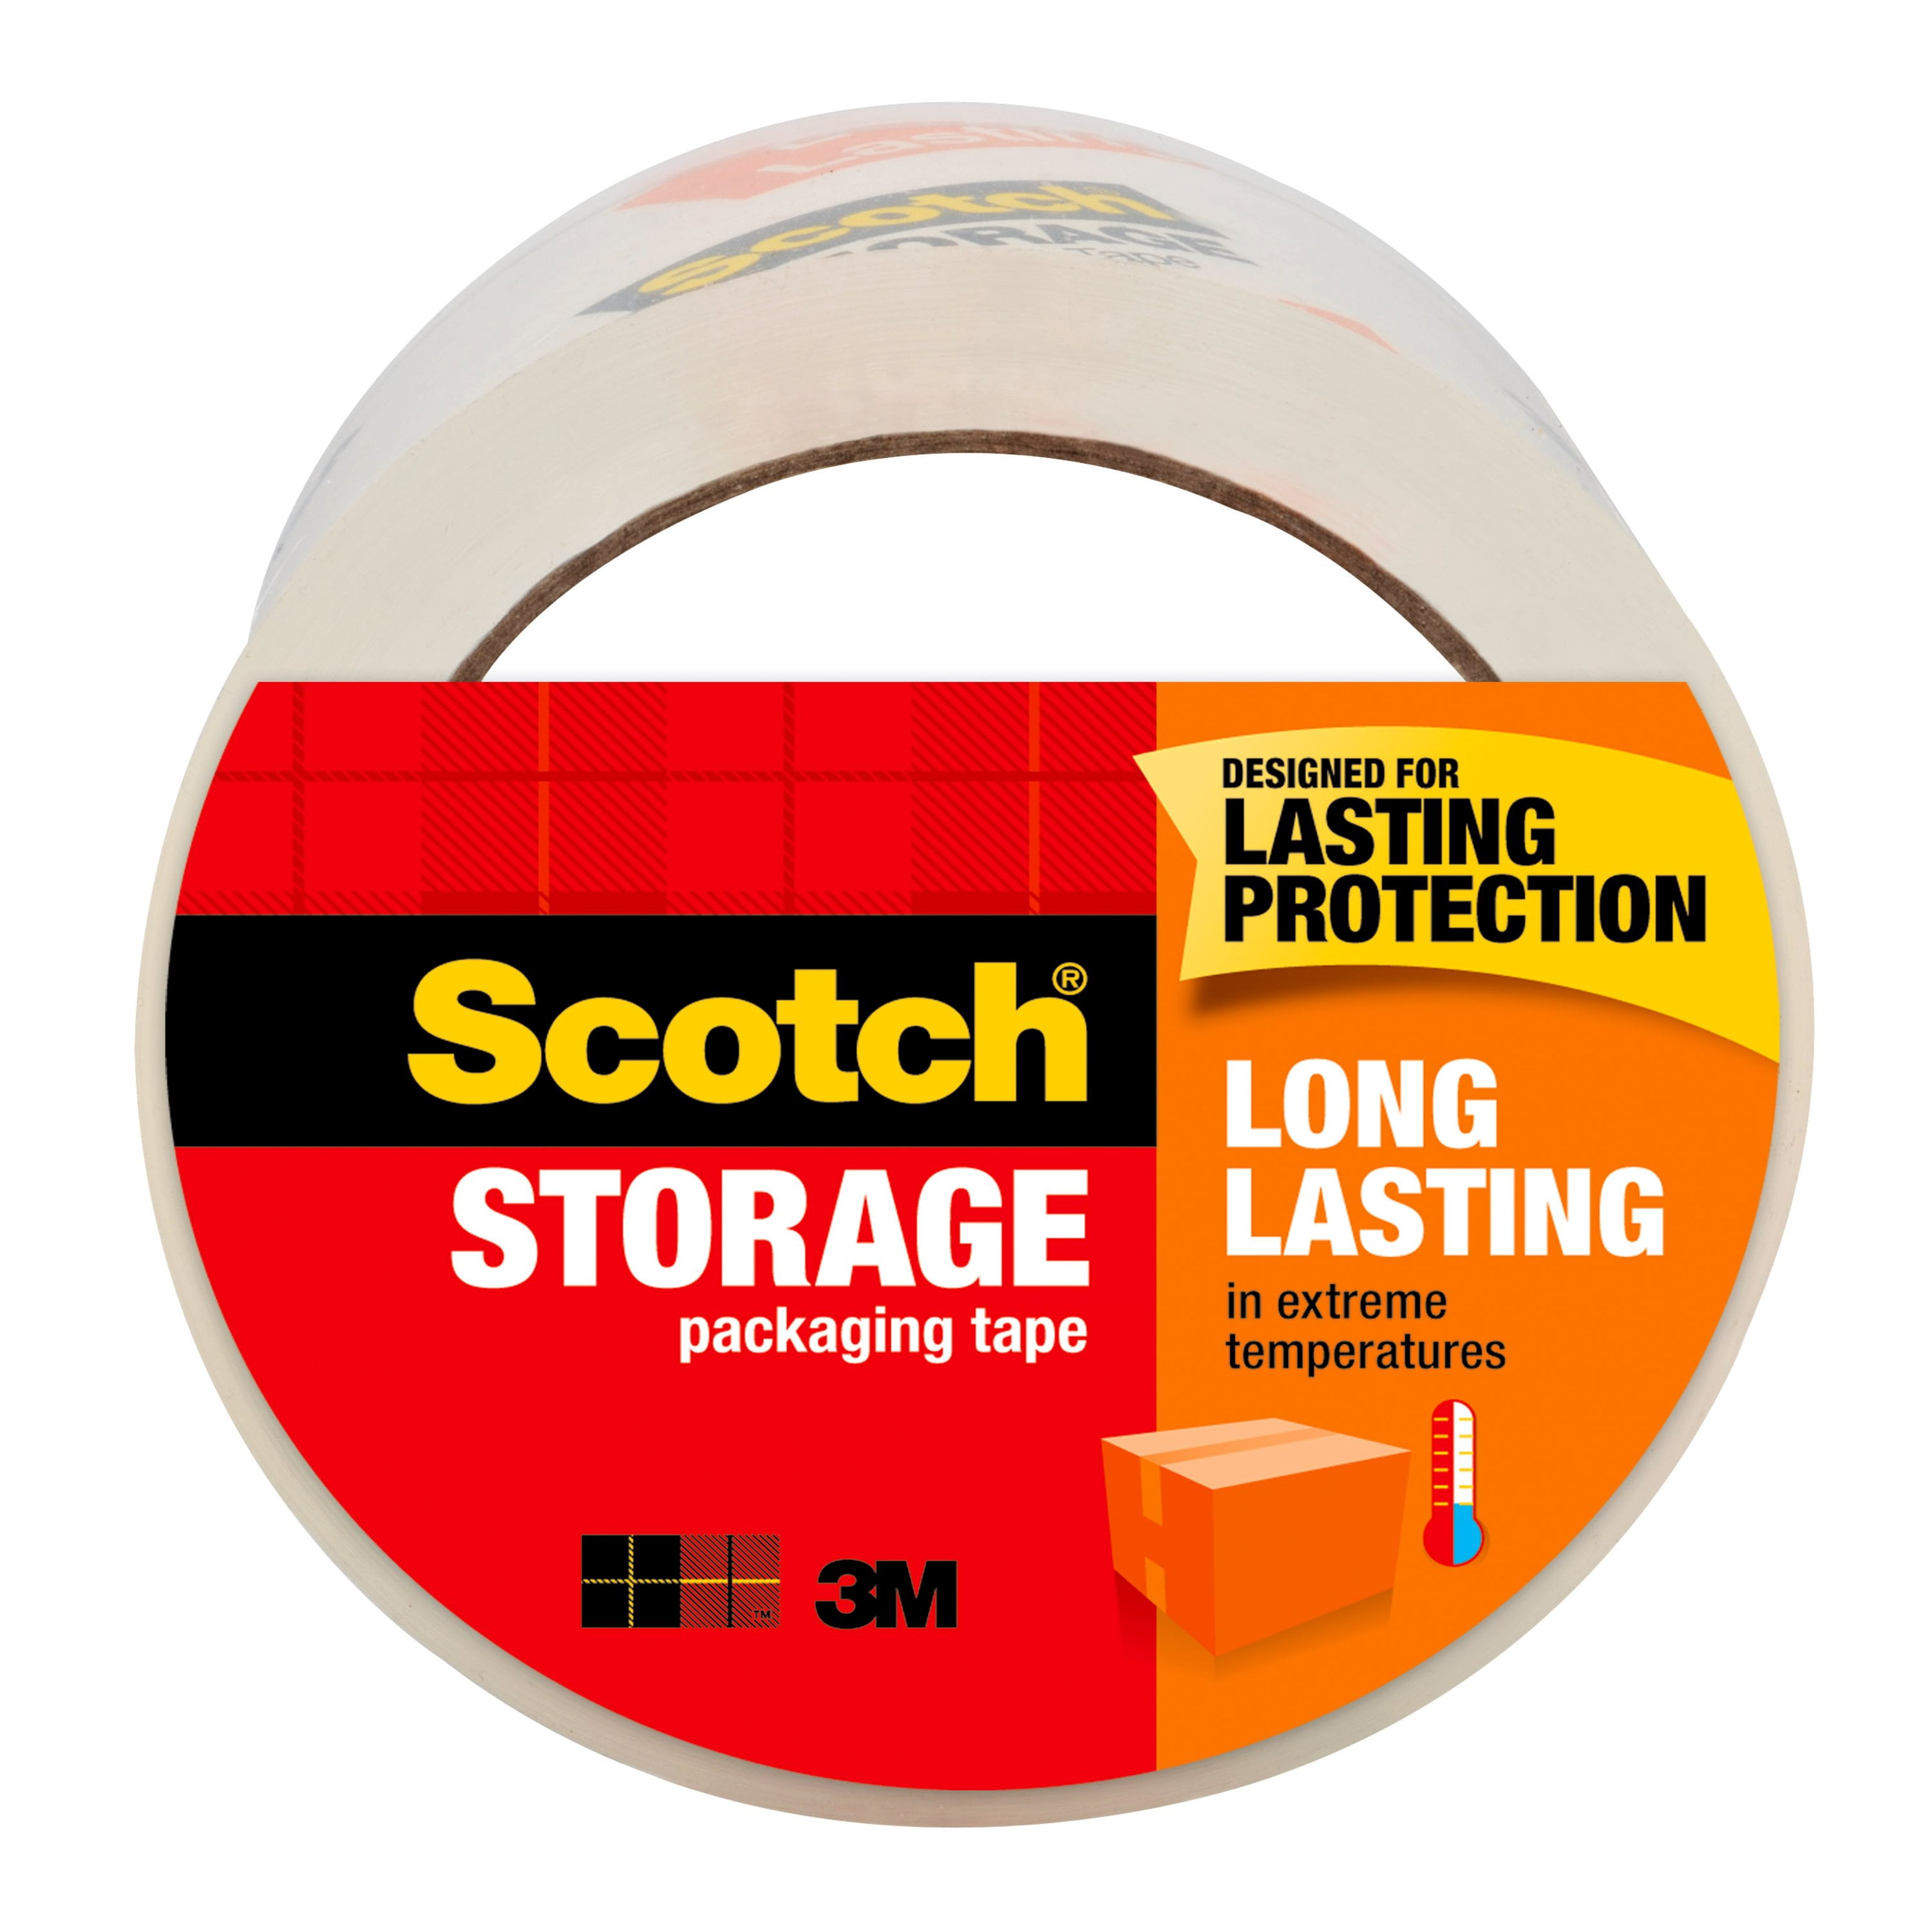 Scotch Moving & Storage Packaging Tape 1.88 Inch x 800 Inch Clear/White